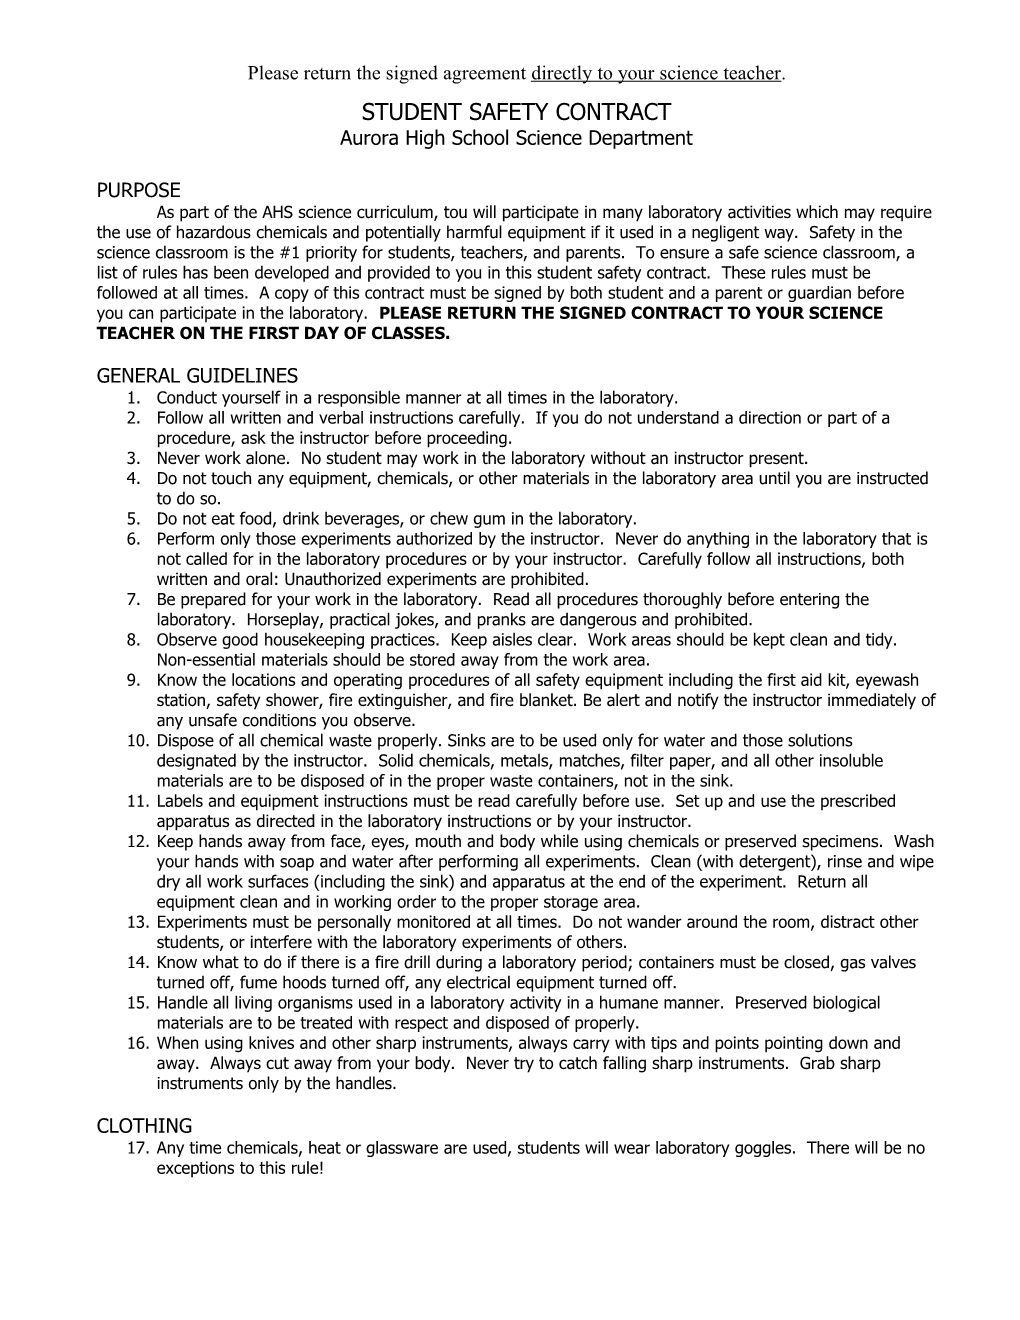 Student Safety Contract